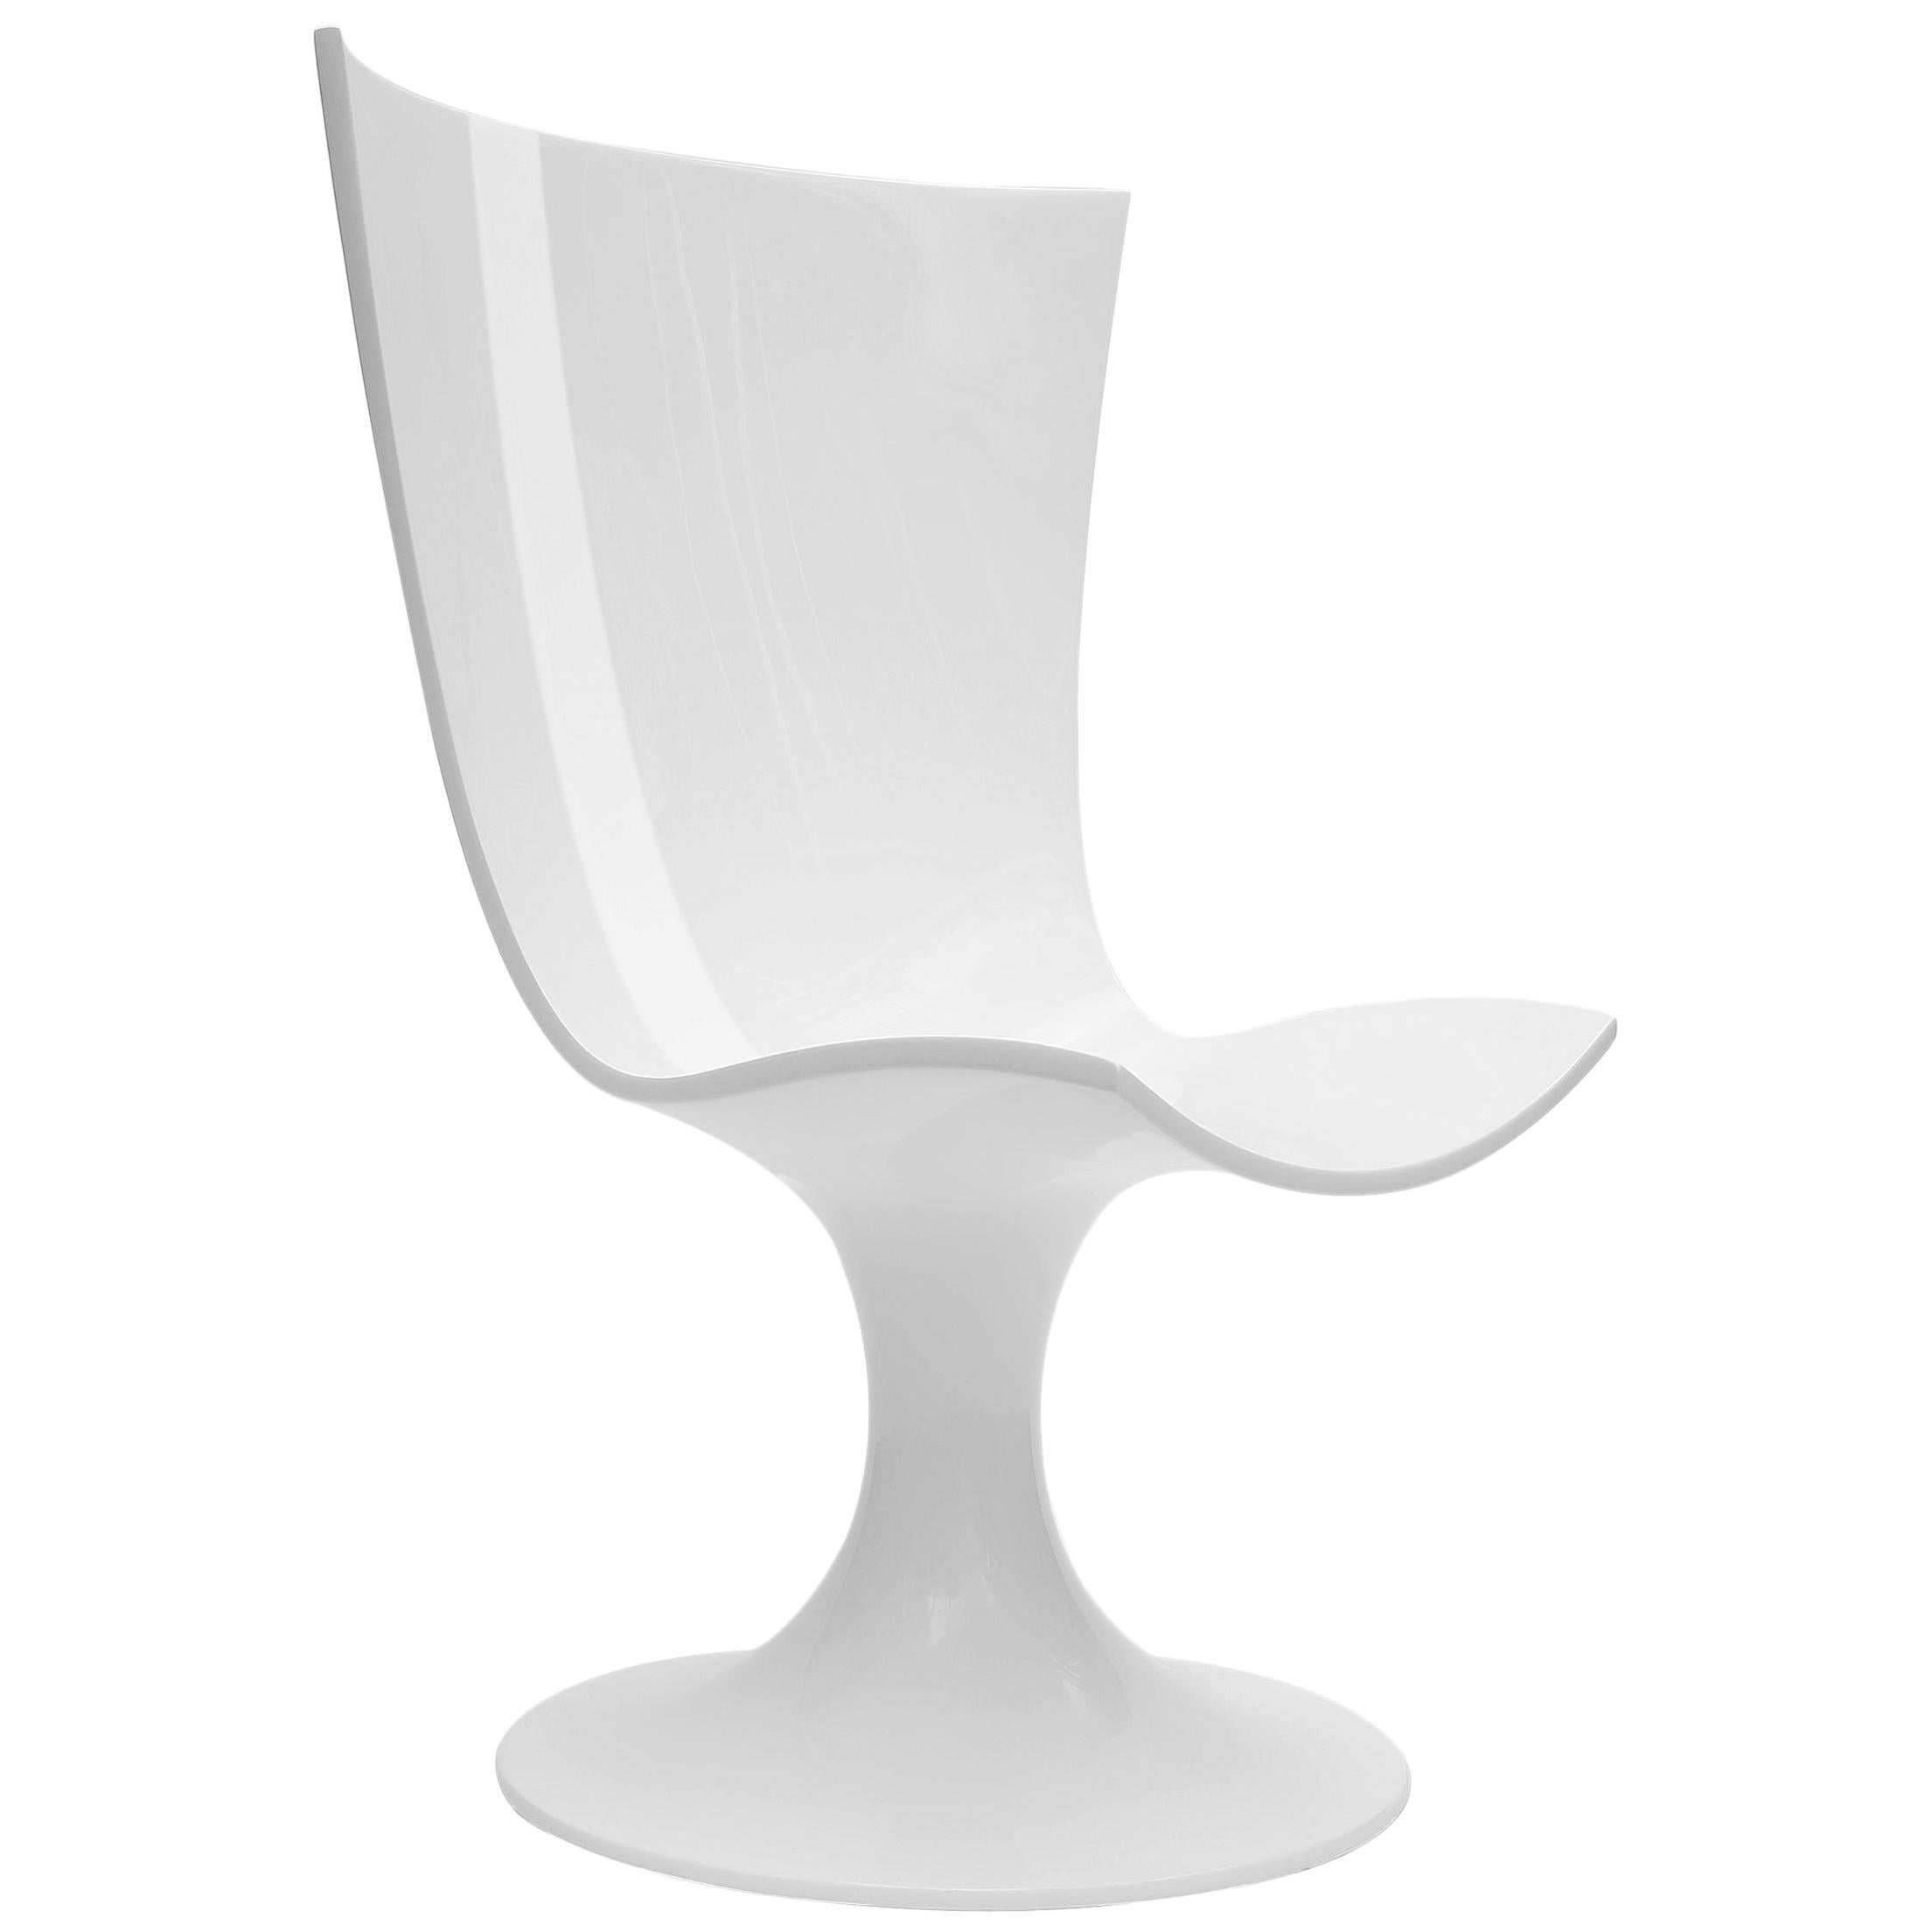 Santos, Imposing Seat, Sculptural Chair in White by Joel Escalona For Sale